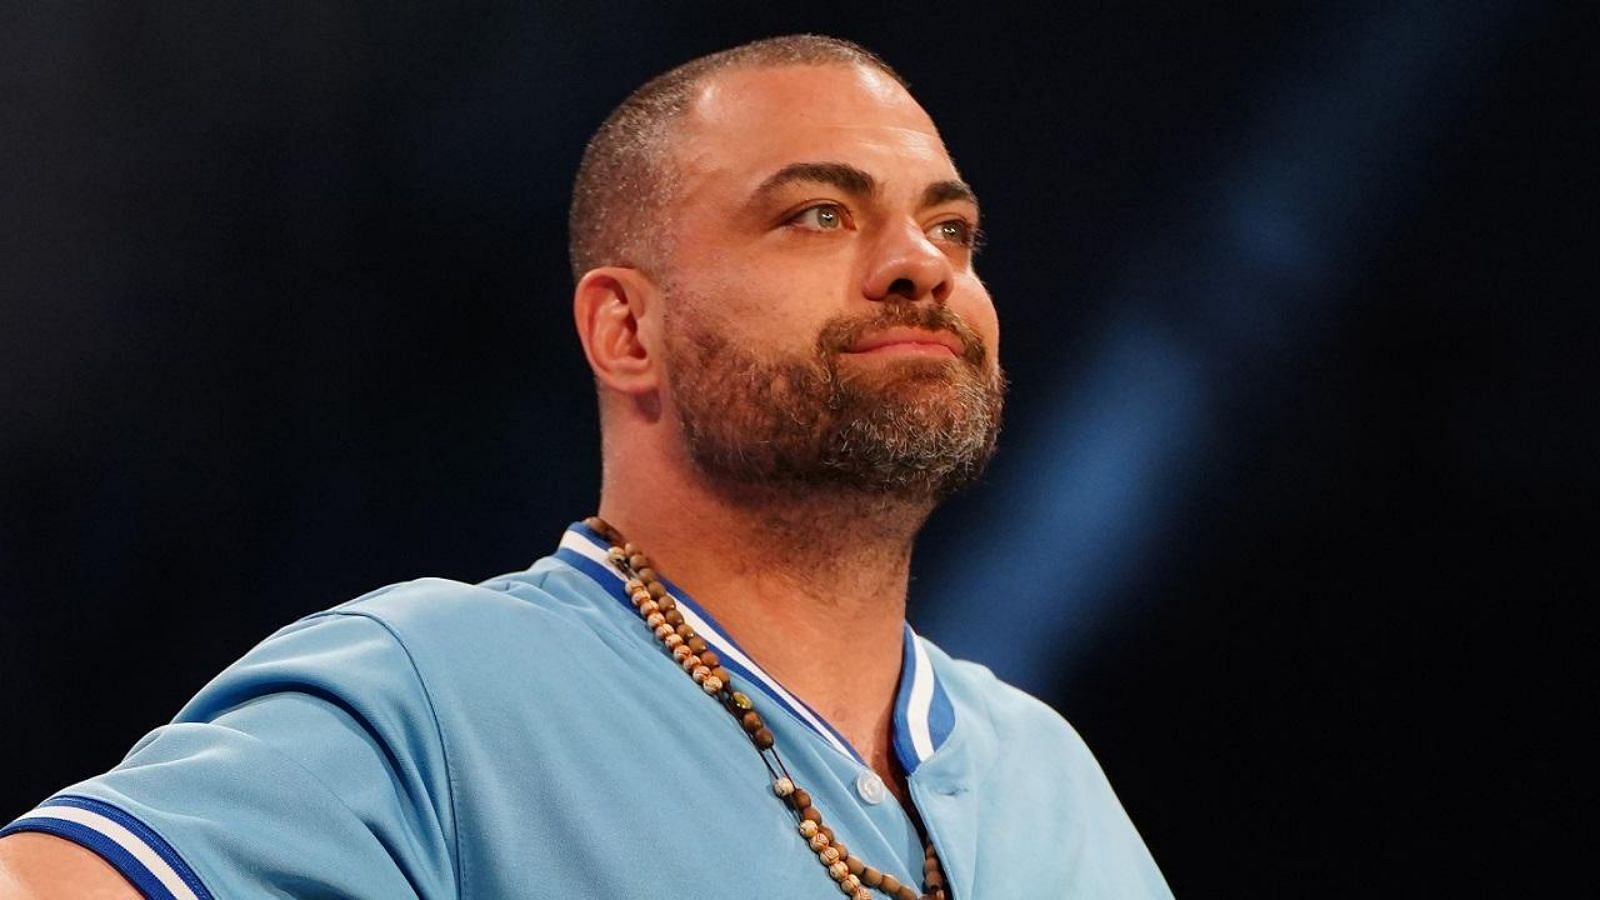 AEW News: Eddie Kingston talks about Jon Moxley's absence from AEW TV